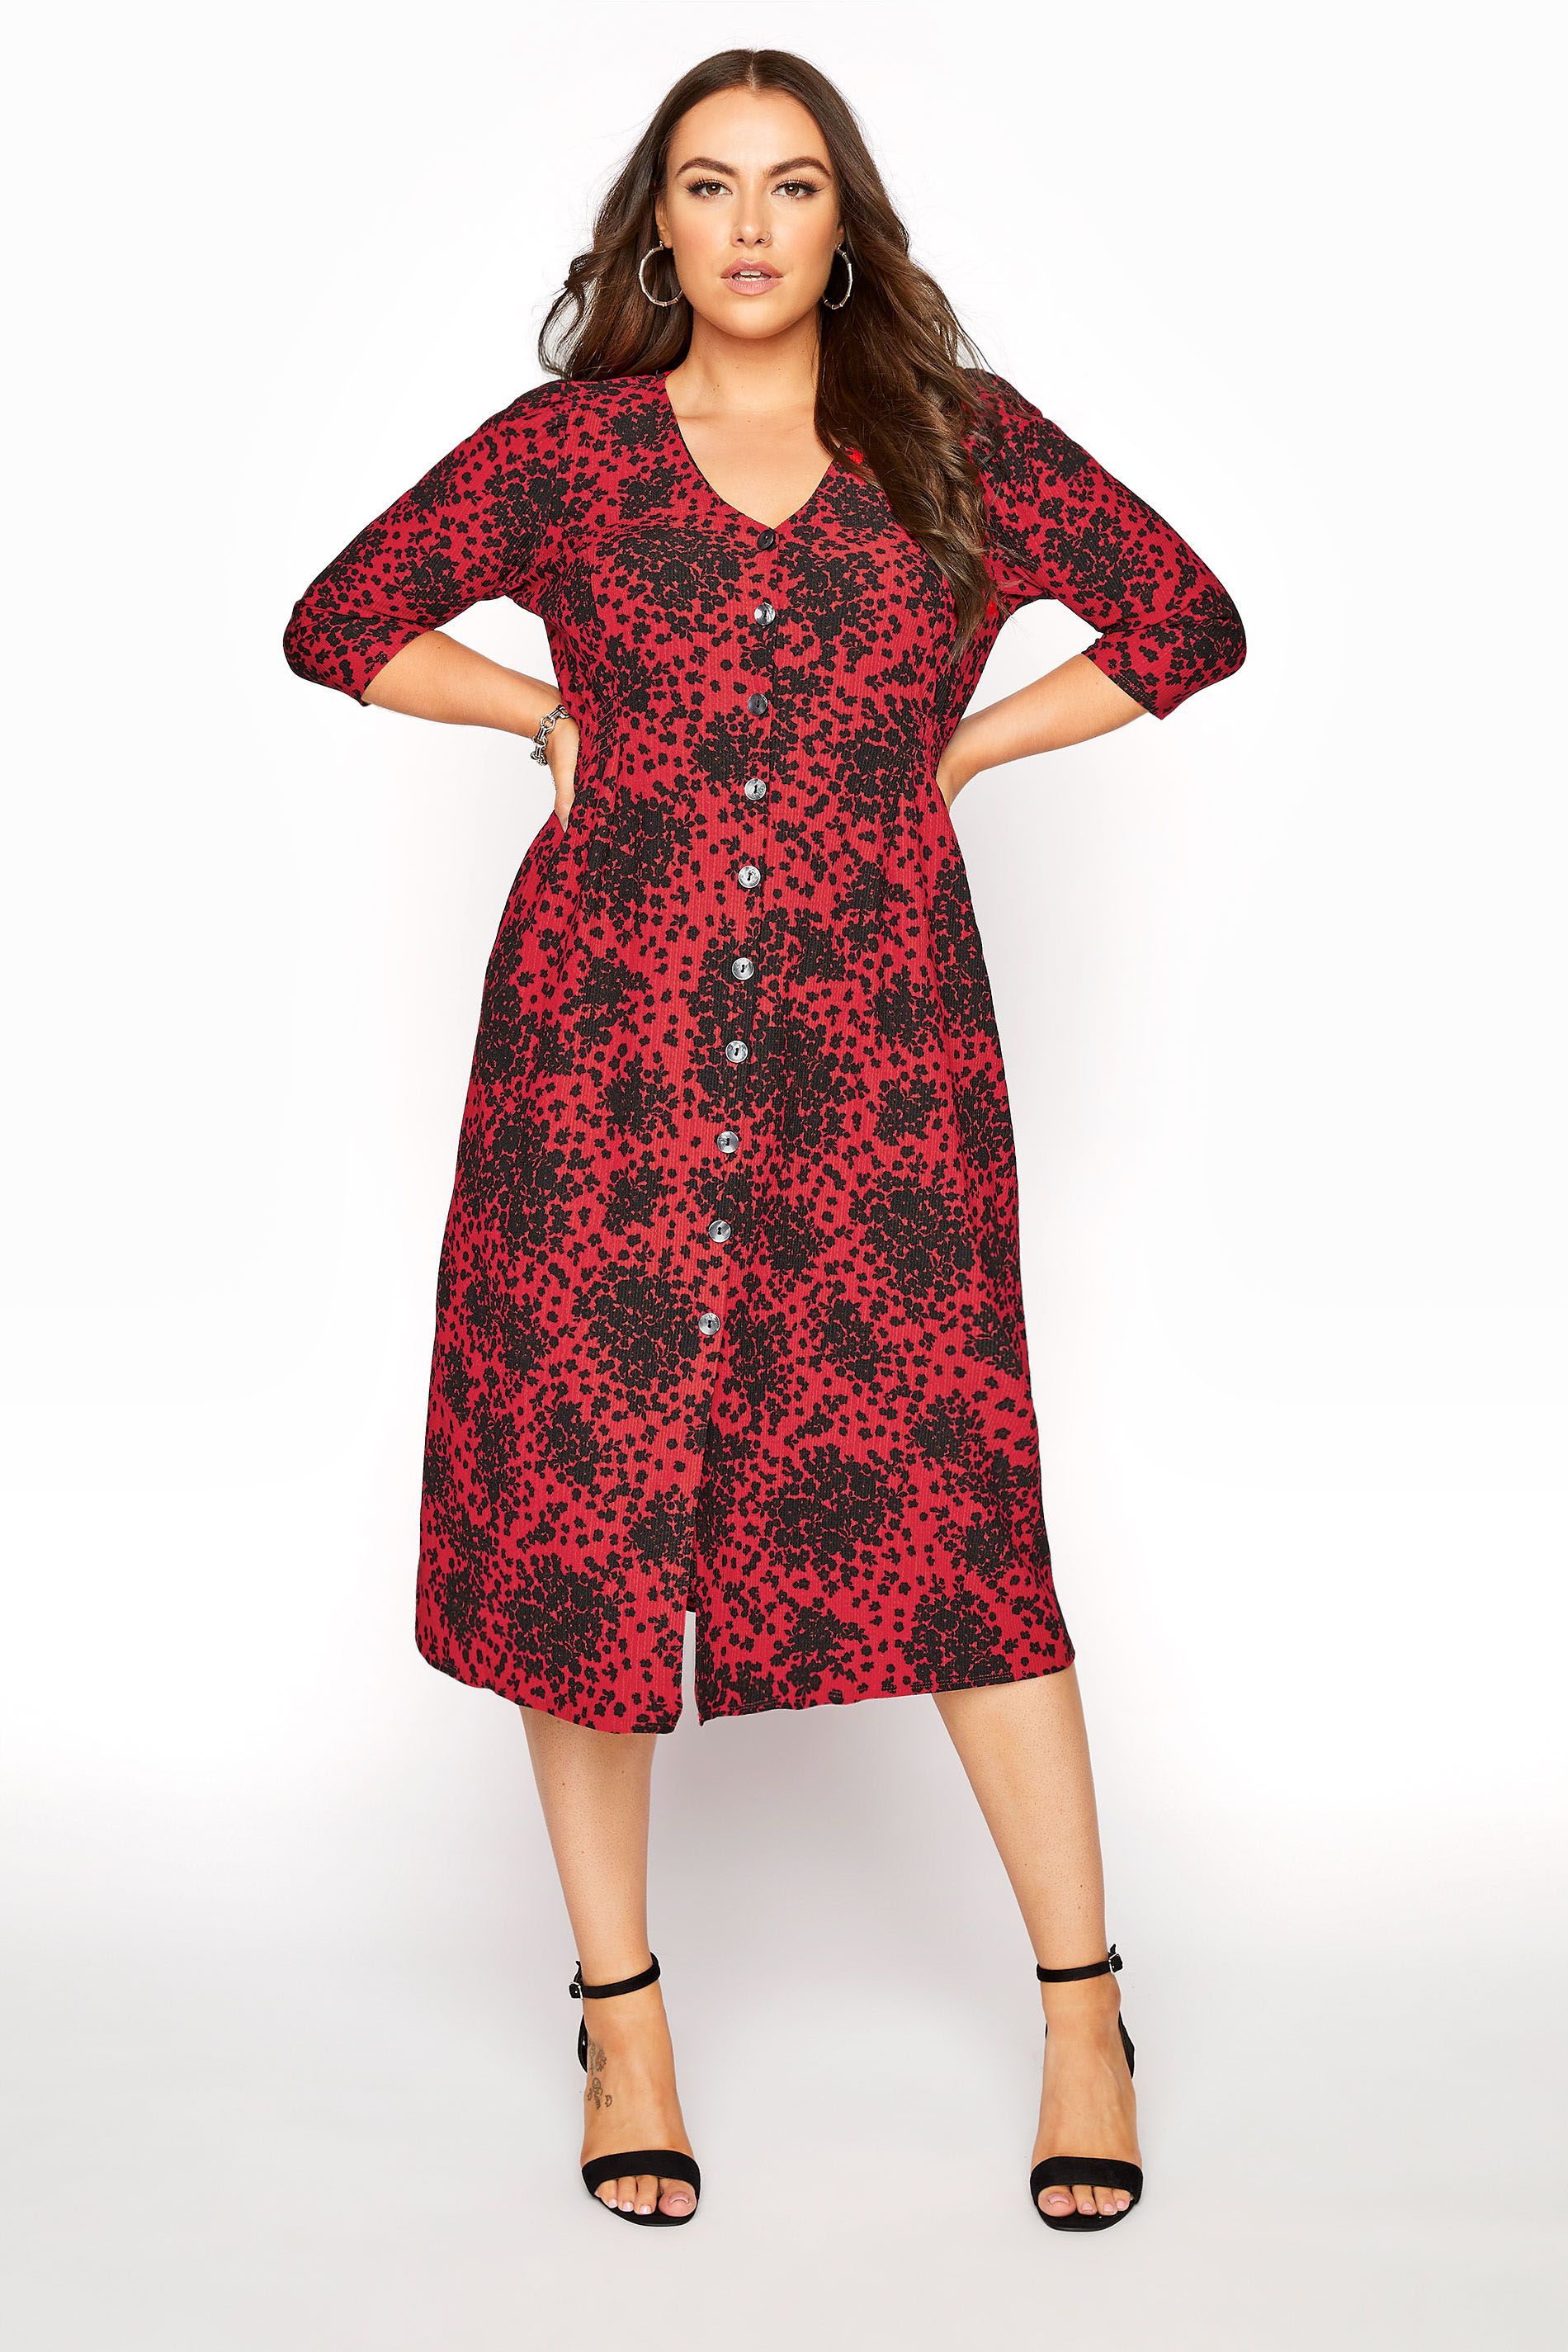 Robes Grande Taille Grande taille  Robes Manches Longues | YOURS LONDON - Robe Rouge Petites Fleurs - FD17326